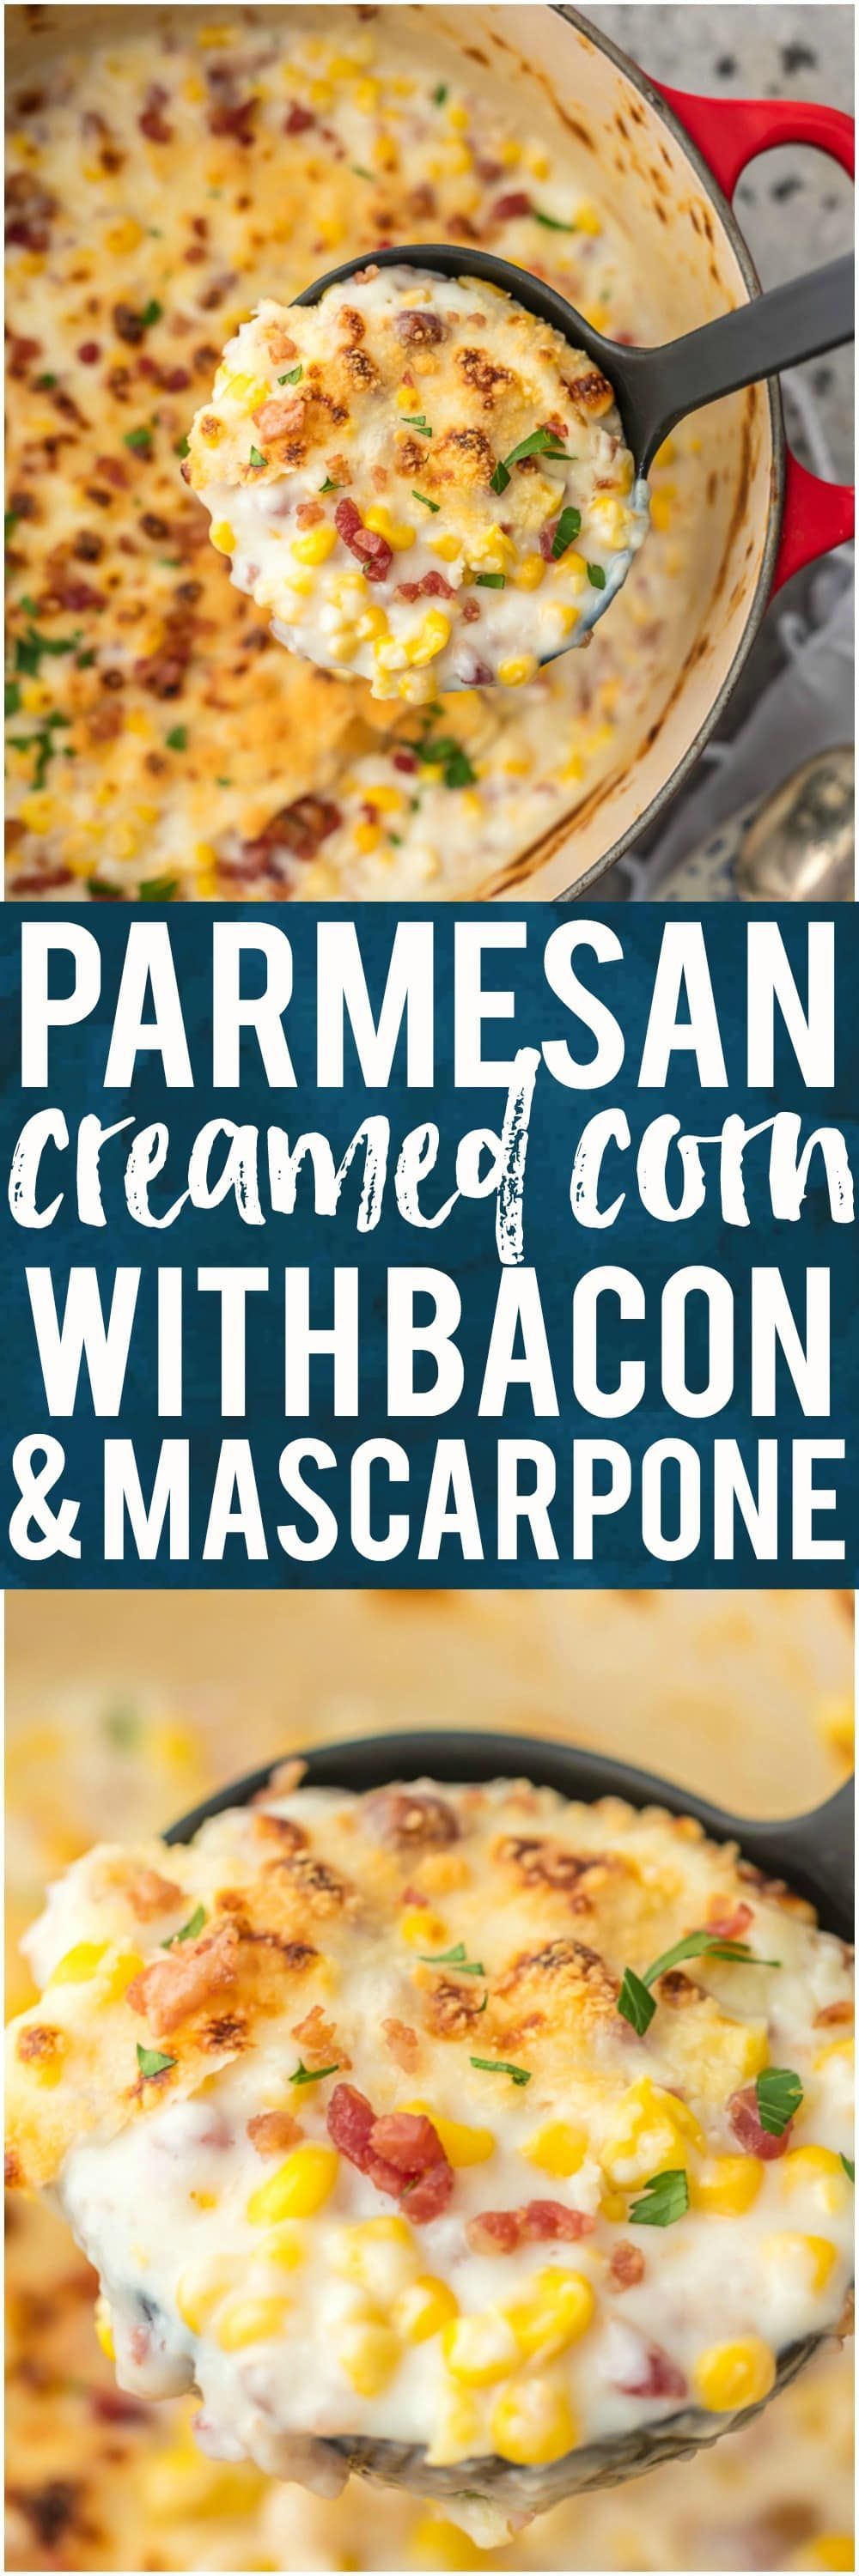 This PARMESAN CREAMED CORN WITH BACON AND MASCARPONE is one of our favorite holiday side dish recipes. If you’re looking for a